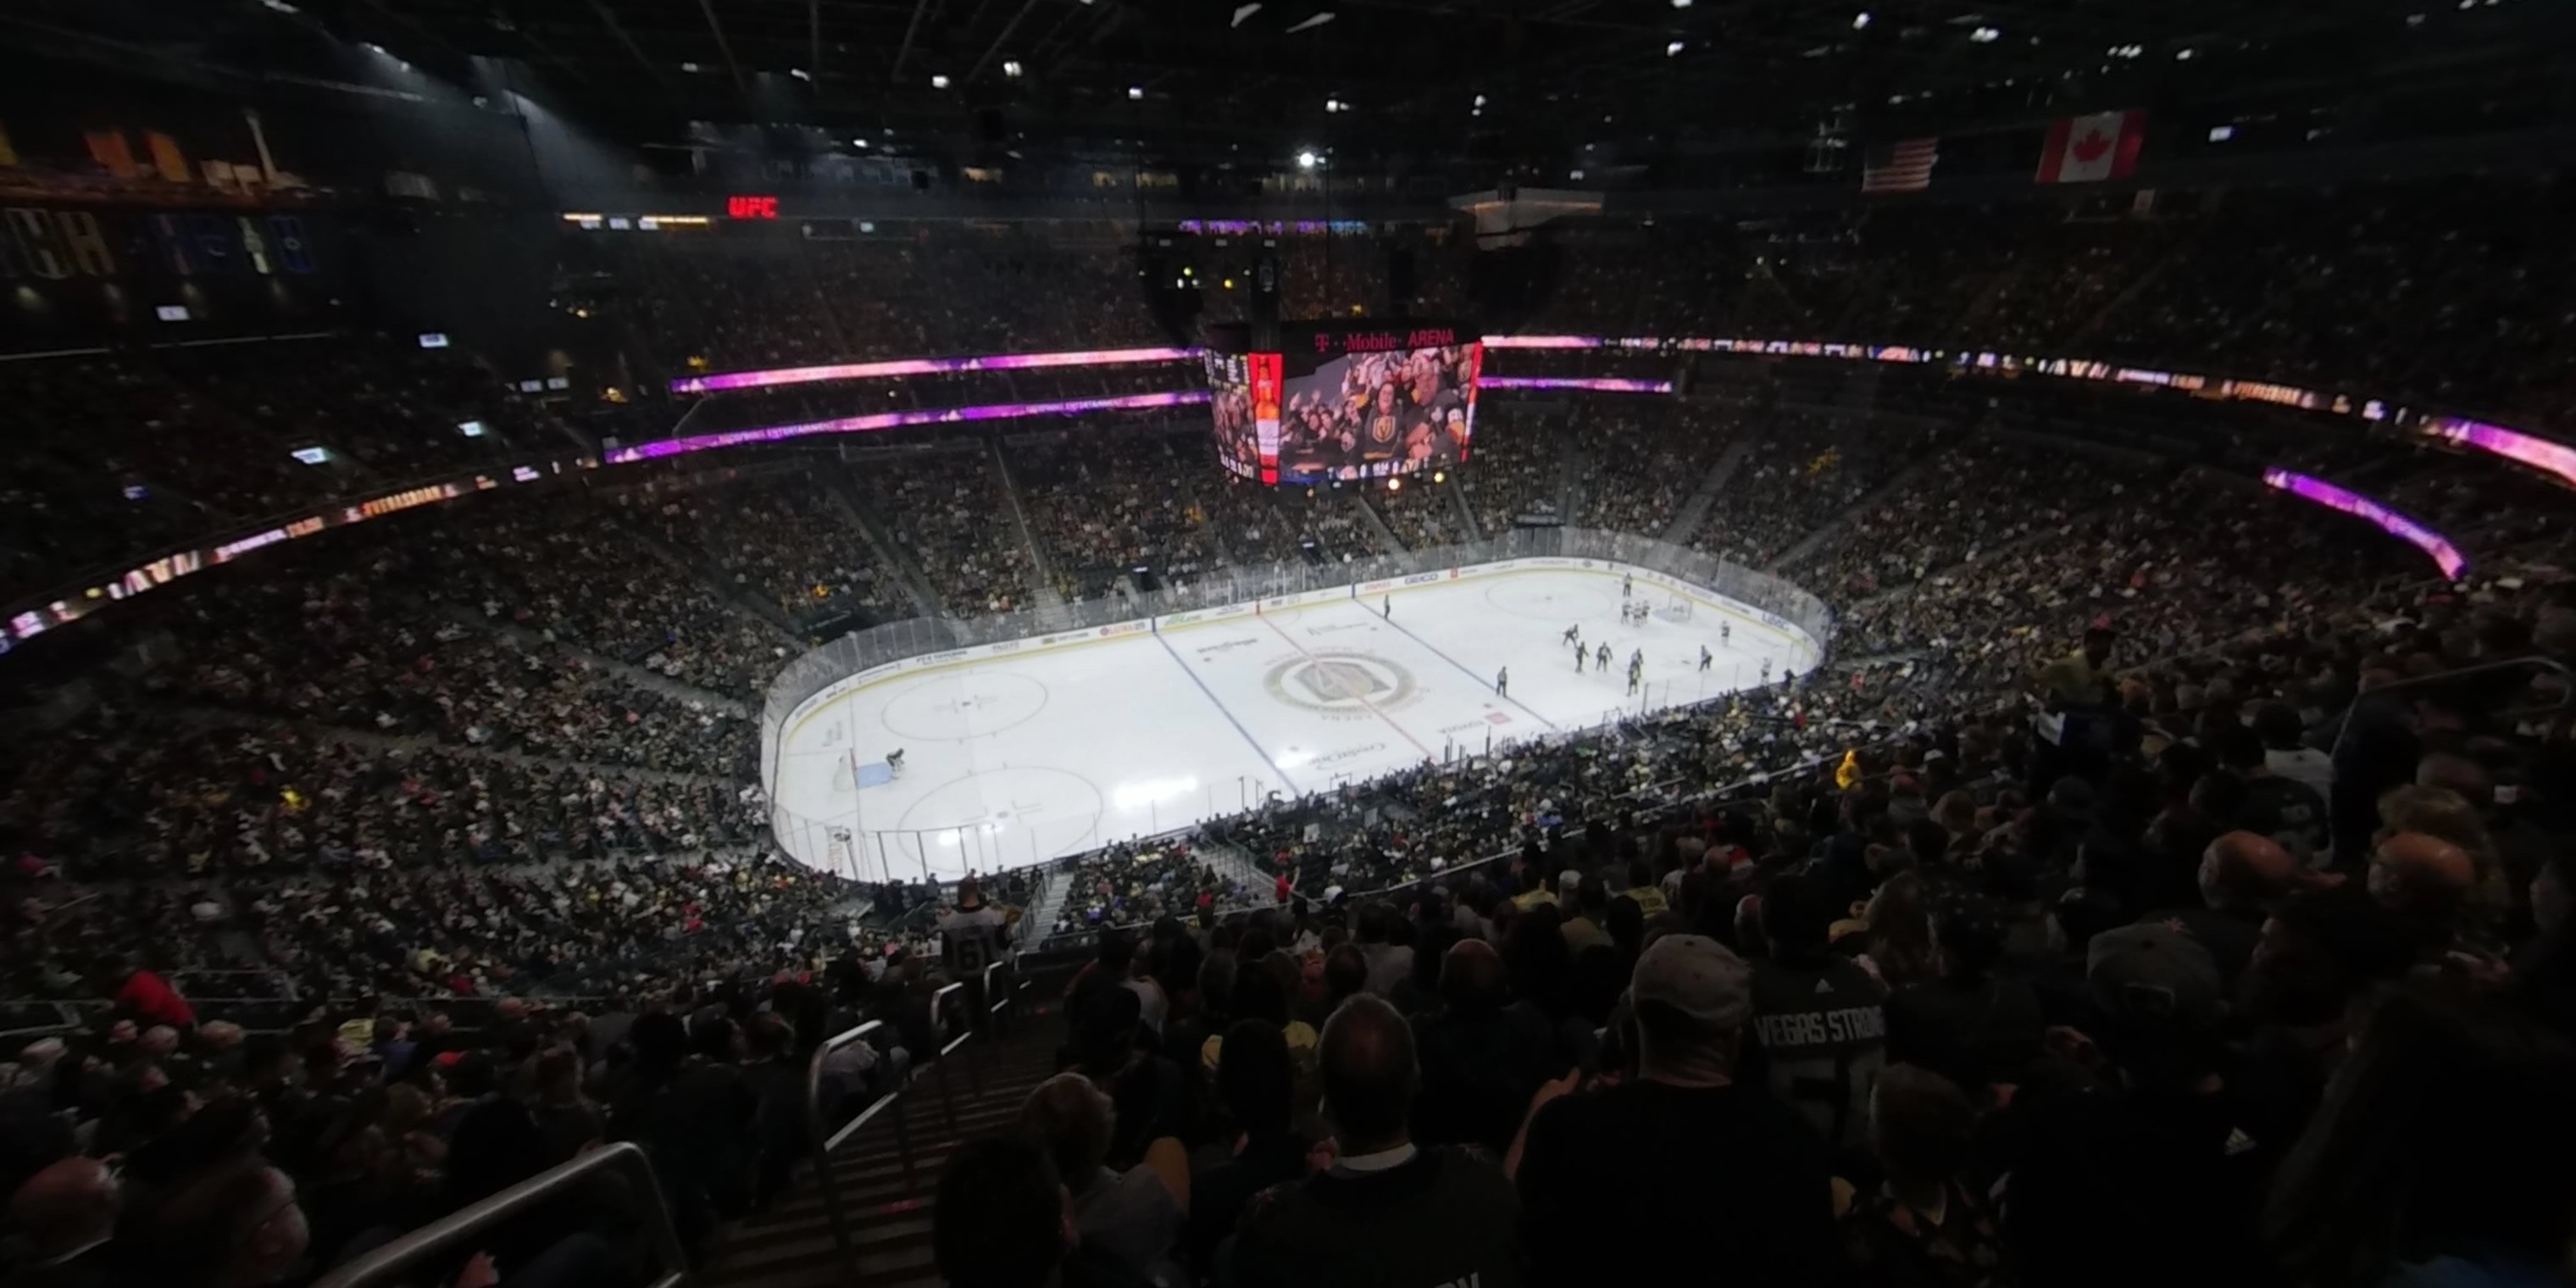 section 202 panoramic seat view  for hockey - t-mobile arena